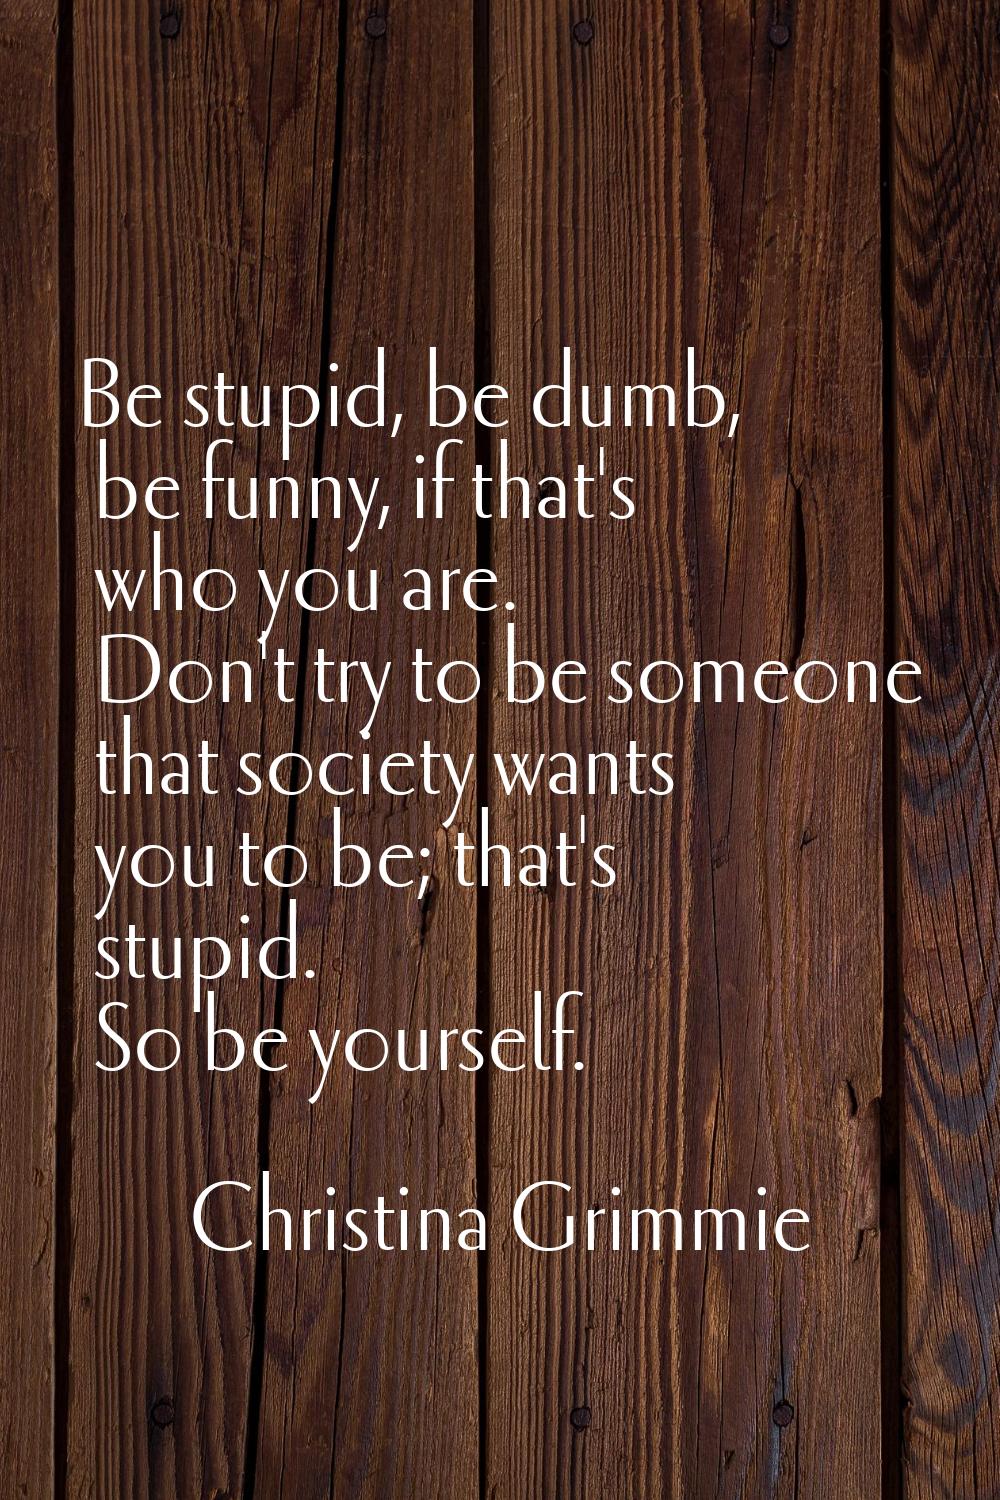 Be stupid, be dumb, be funny, if that's who you are. Don't try to be someone that society wants you